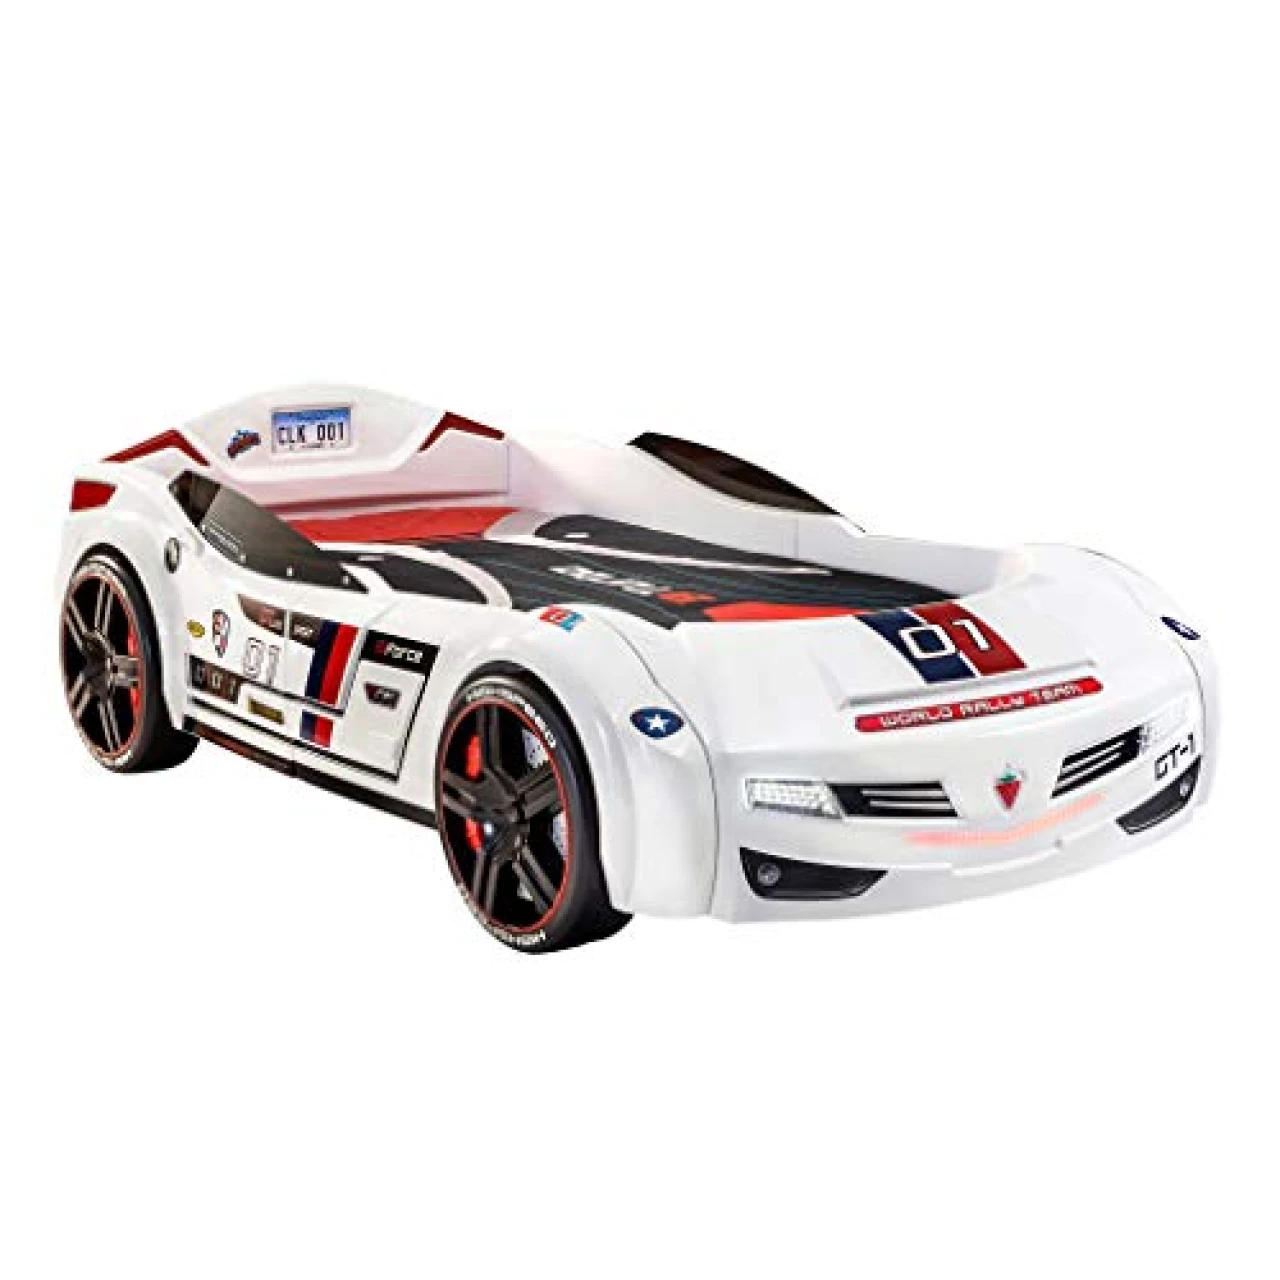 Cilek BiTurbo Remote Controlled, LED Headlights, Engine Sound, License Plate, Twin Size, White